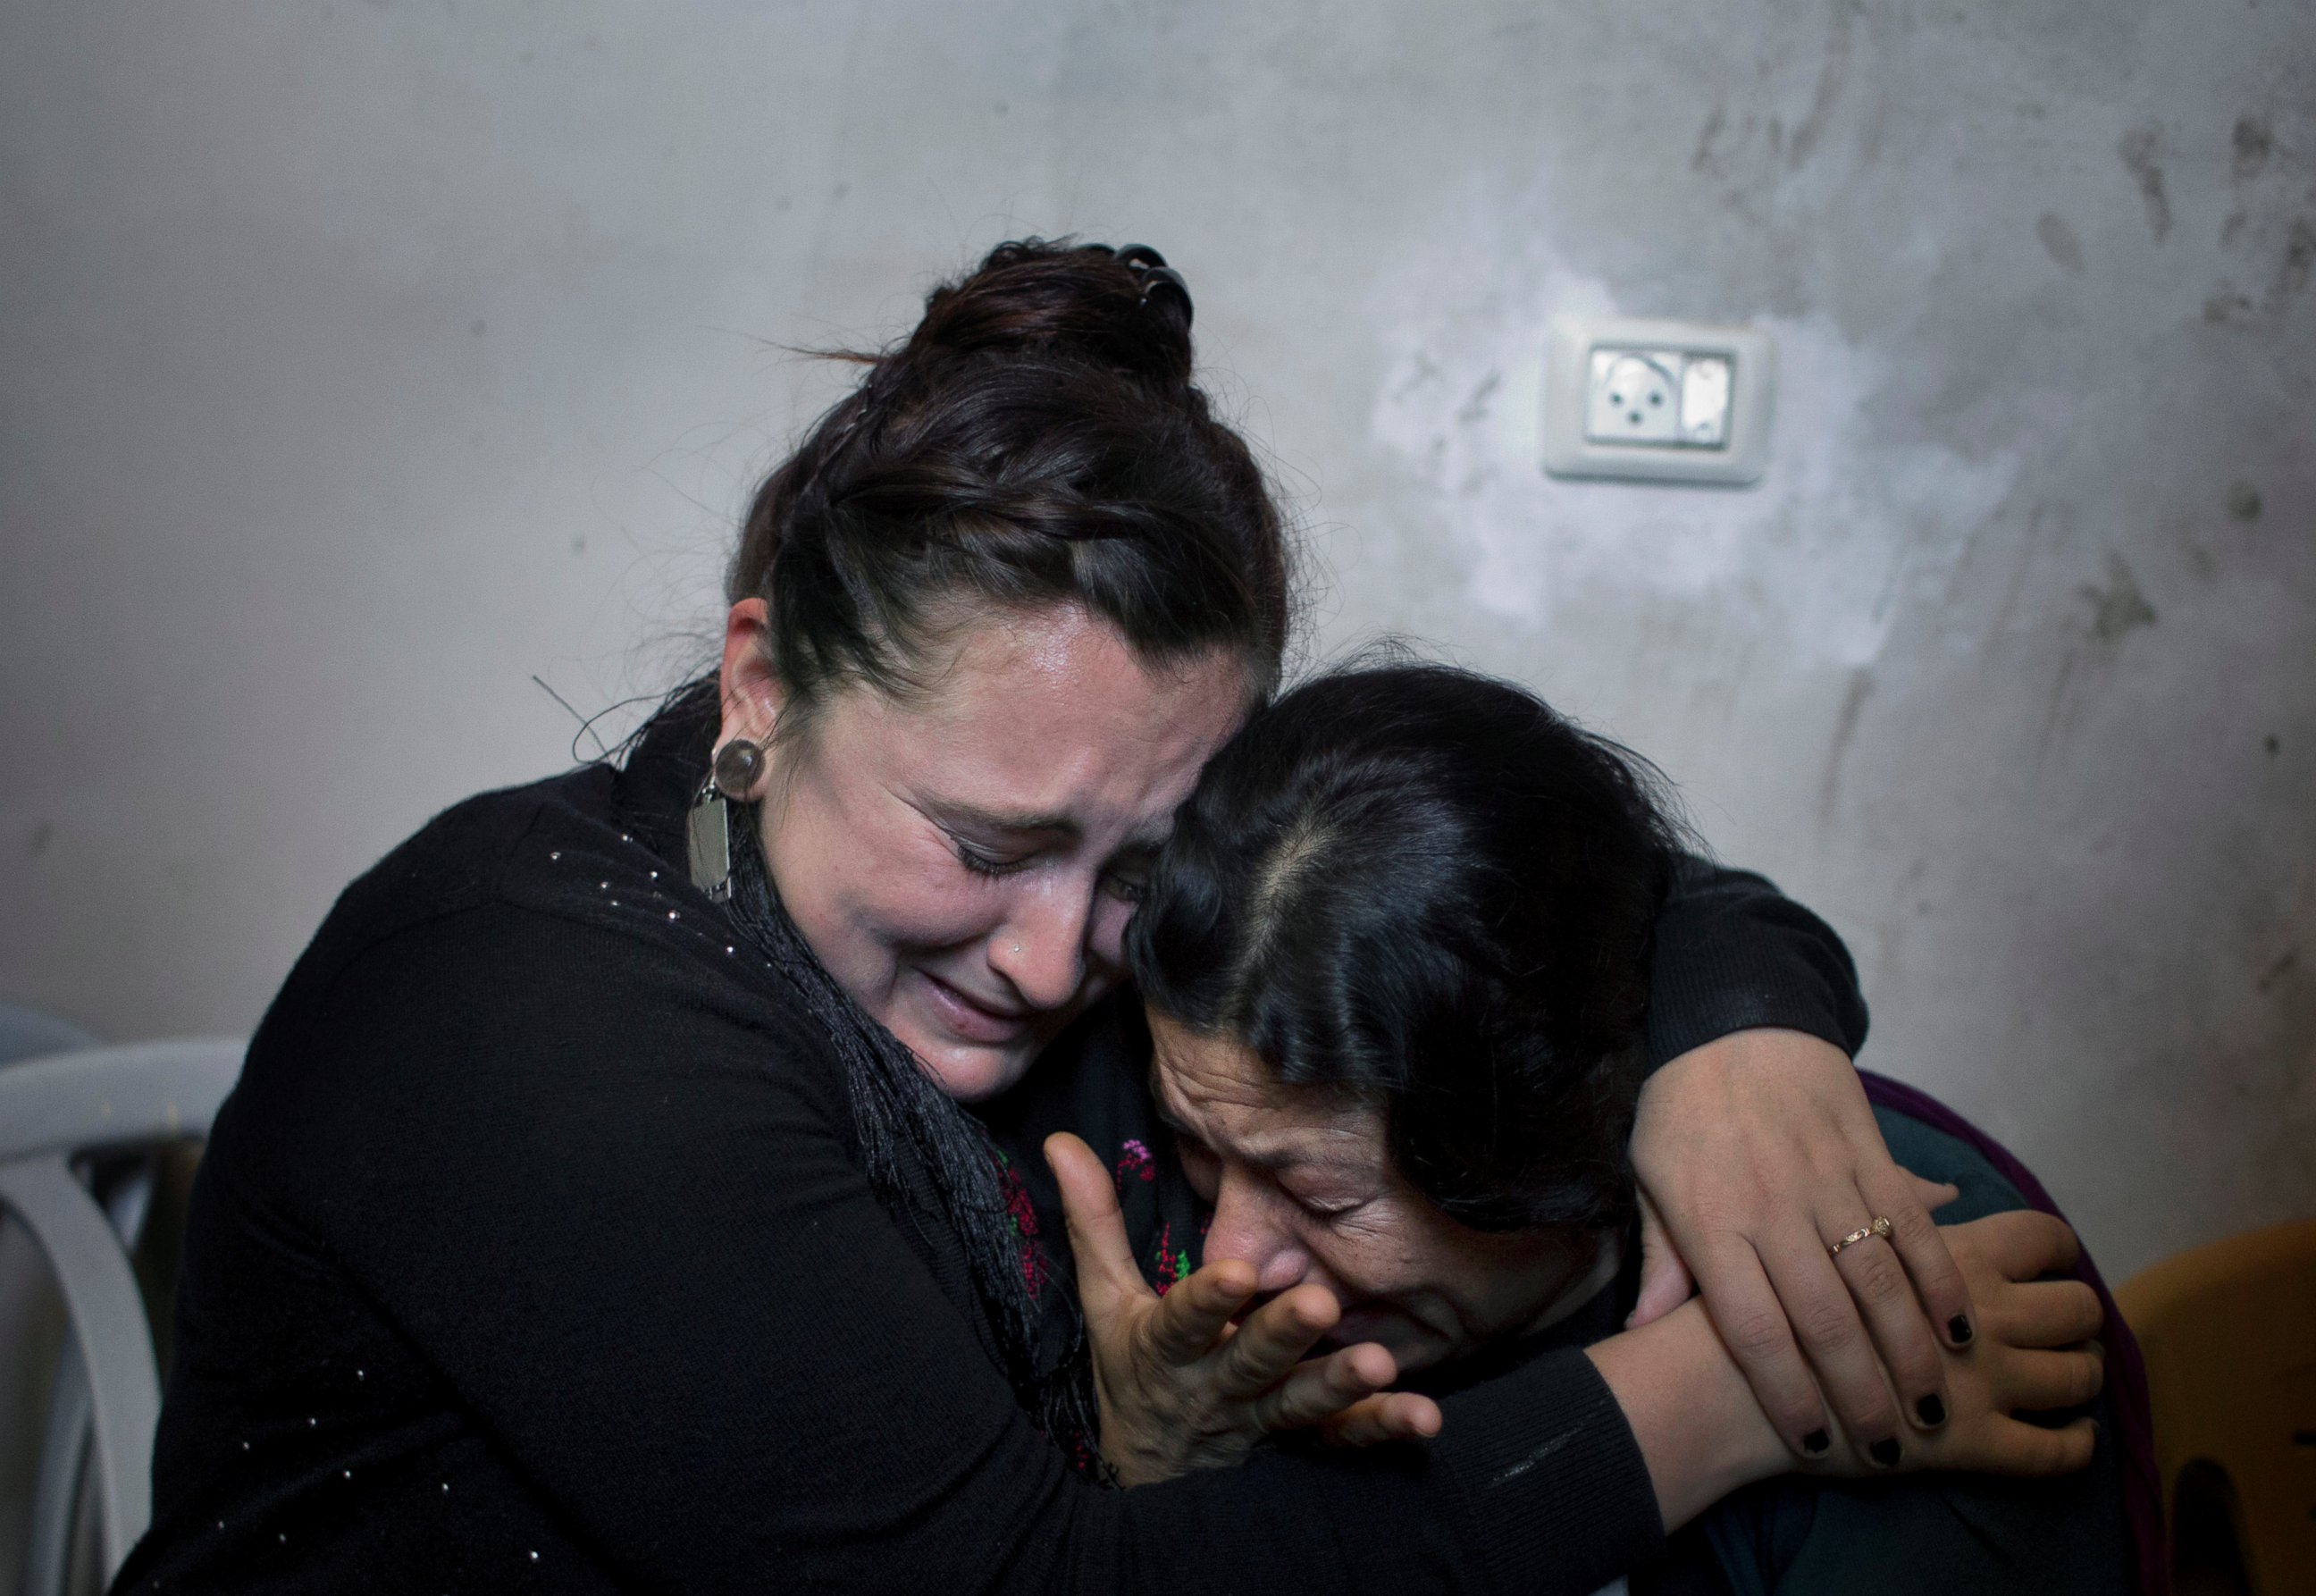 PHOTO: Two Palestinian women mourn during the funeral of Moataz Zawahara, who was killed in clashes with Israeli troops, at the family house in Deheisha refugee camp, near the West Bank city of Bethlehem, Wednesday, Oct. 14, 2015. 